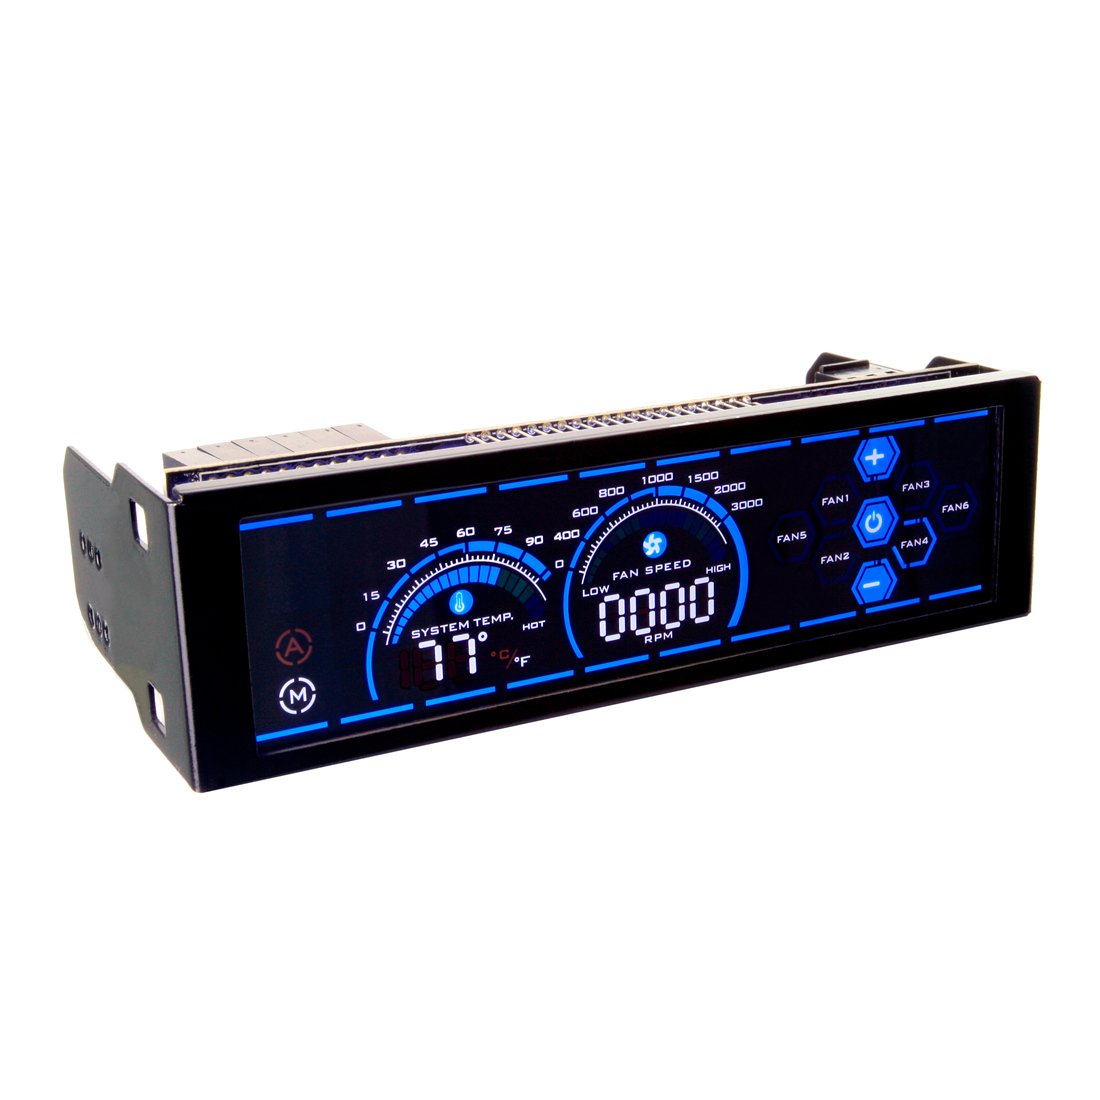 Alseye A-100L 6 Channels Computer Fan Controller with 5.25Inches LCD Touch Screen Panel for Water Cooling Pump and Fans Controls for Computers Units (RED and BLUE)